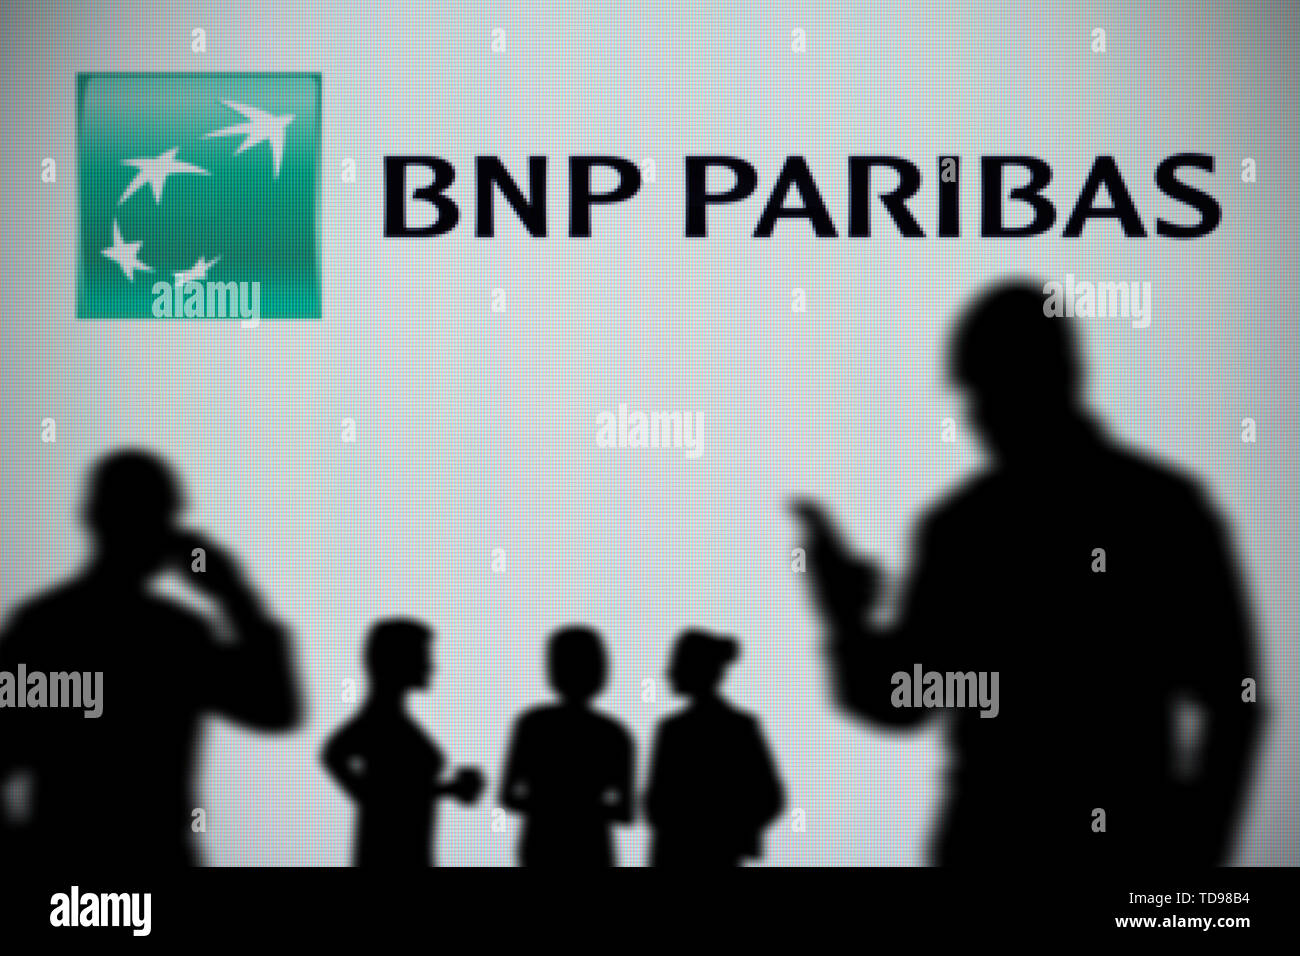 The BNP Paribas logo is seen on an LED screen in the background while a silhouetted person uses a smartphone in the foreground (Editorial use only) Stock Photo